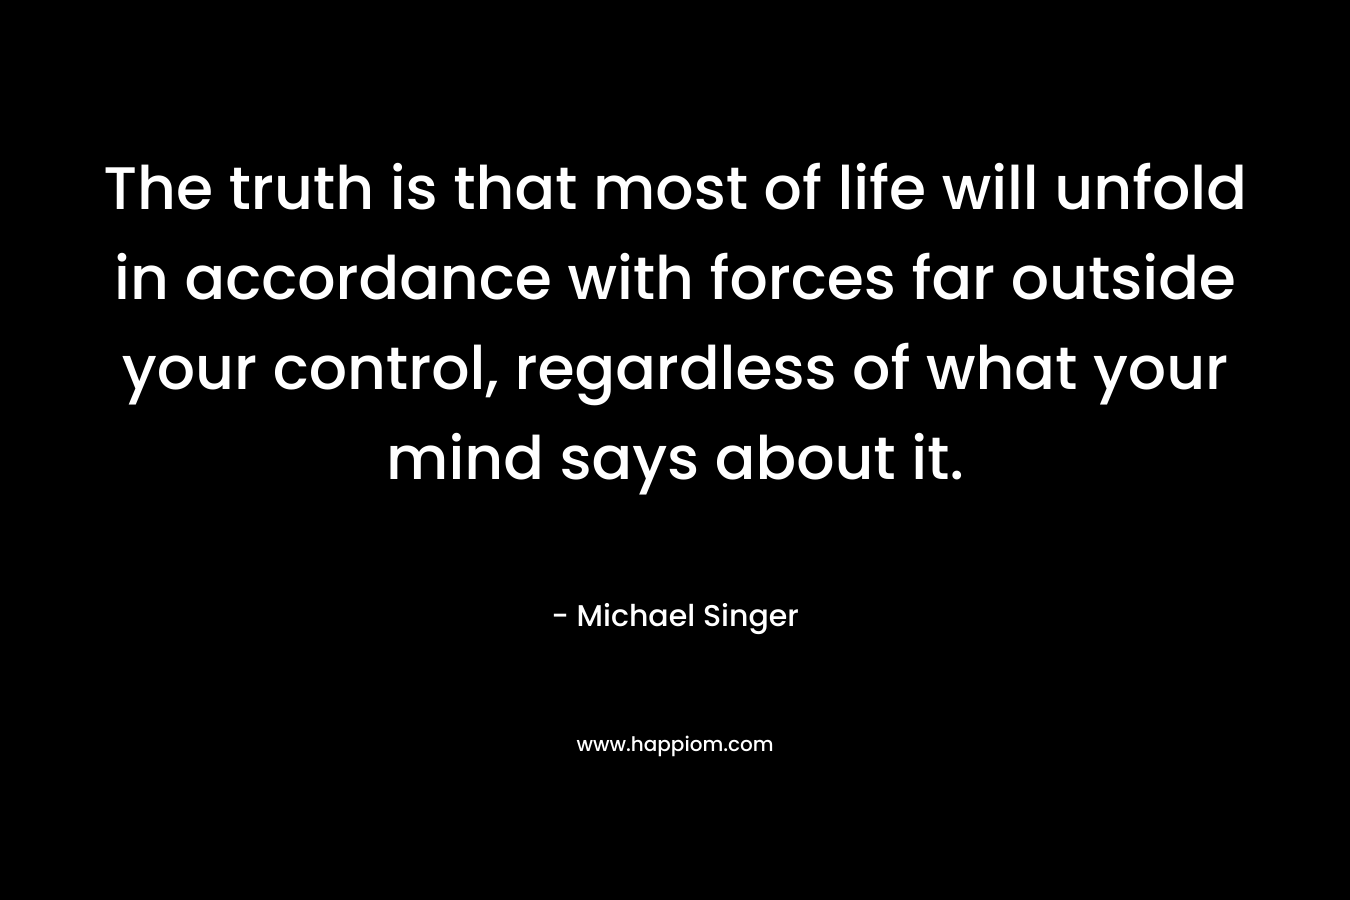 The truth is that most of life will unfold in accordance with forces far outside your control, regardless of what your mind says about it. – Michael Singer